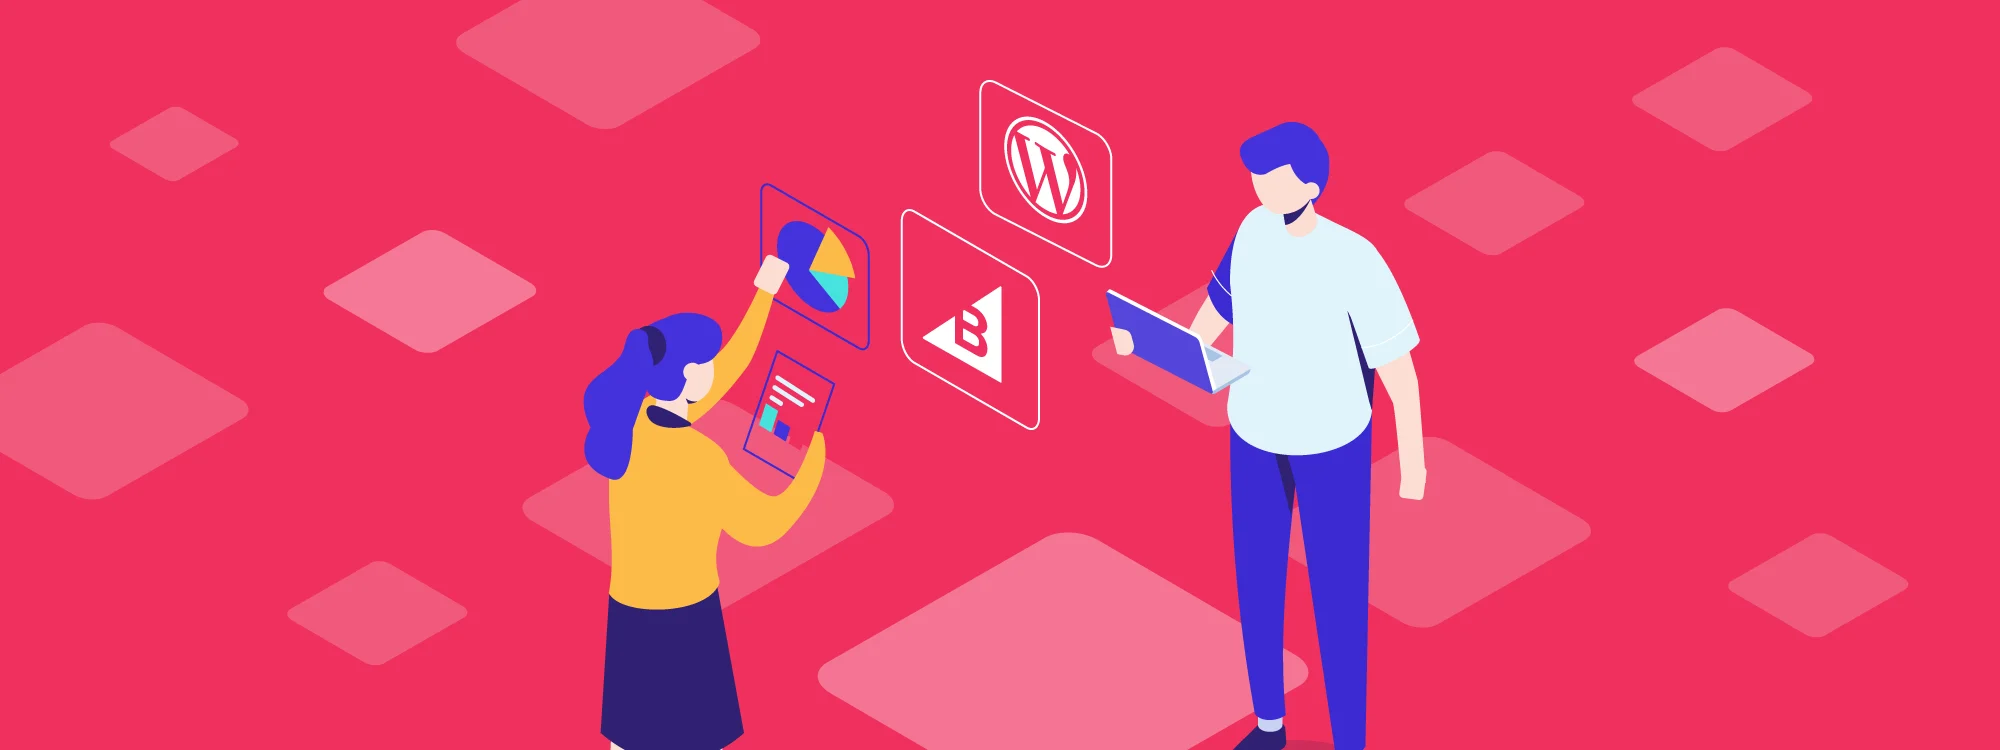 https://cms-wp.bigcommerce.com/wp-content/uploads/2019/01/how-to-sell-on-wordpress.png